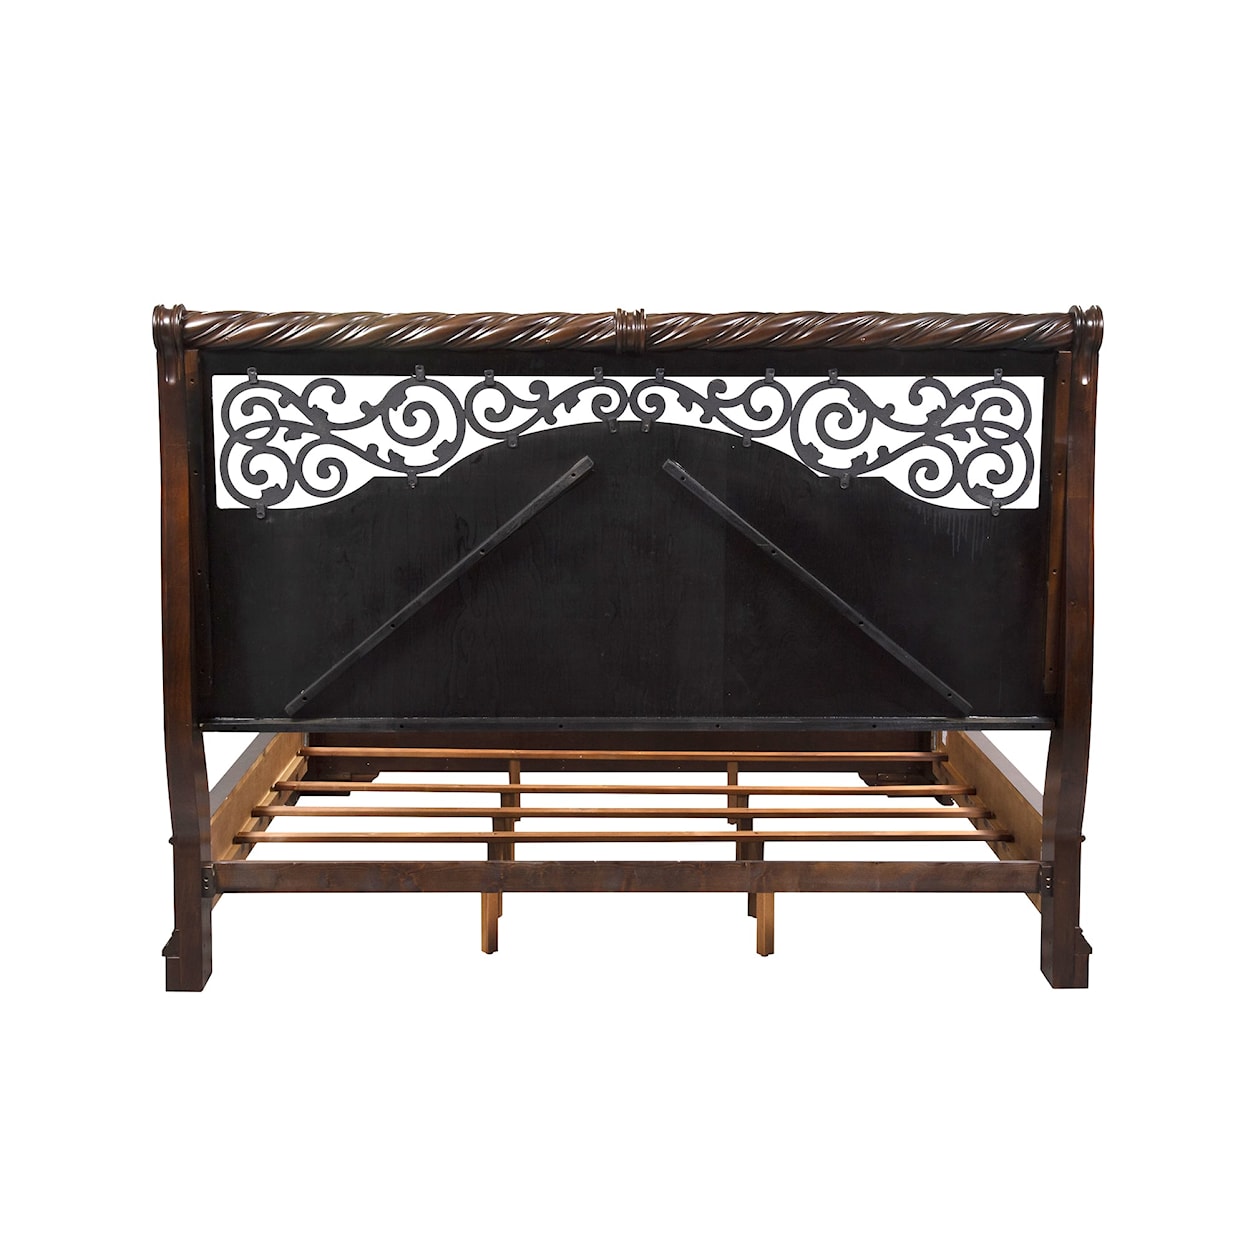 Freedom Furniture Arbor Place Queen Sleigh Bed